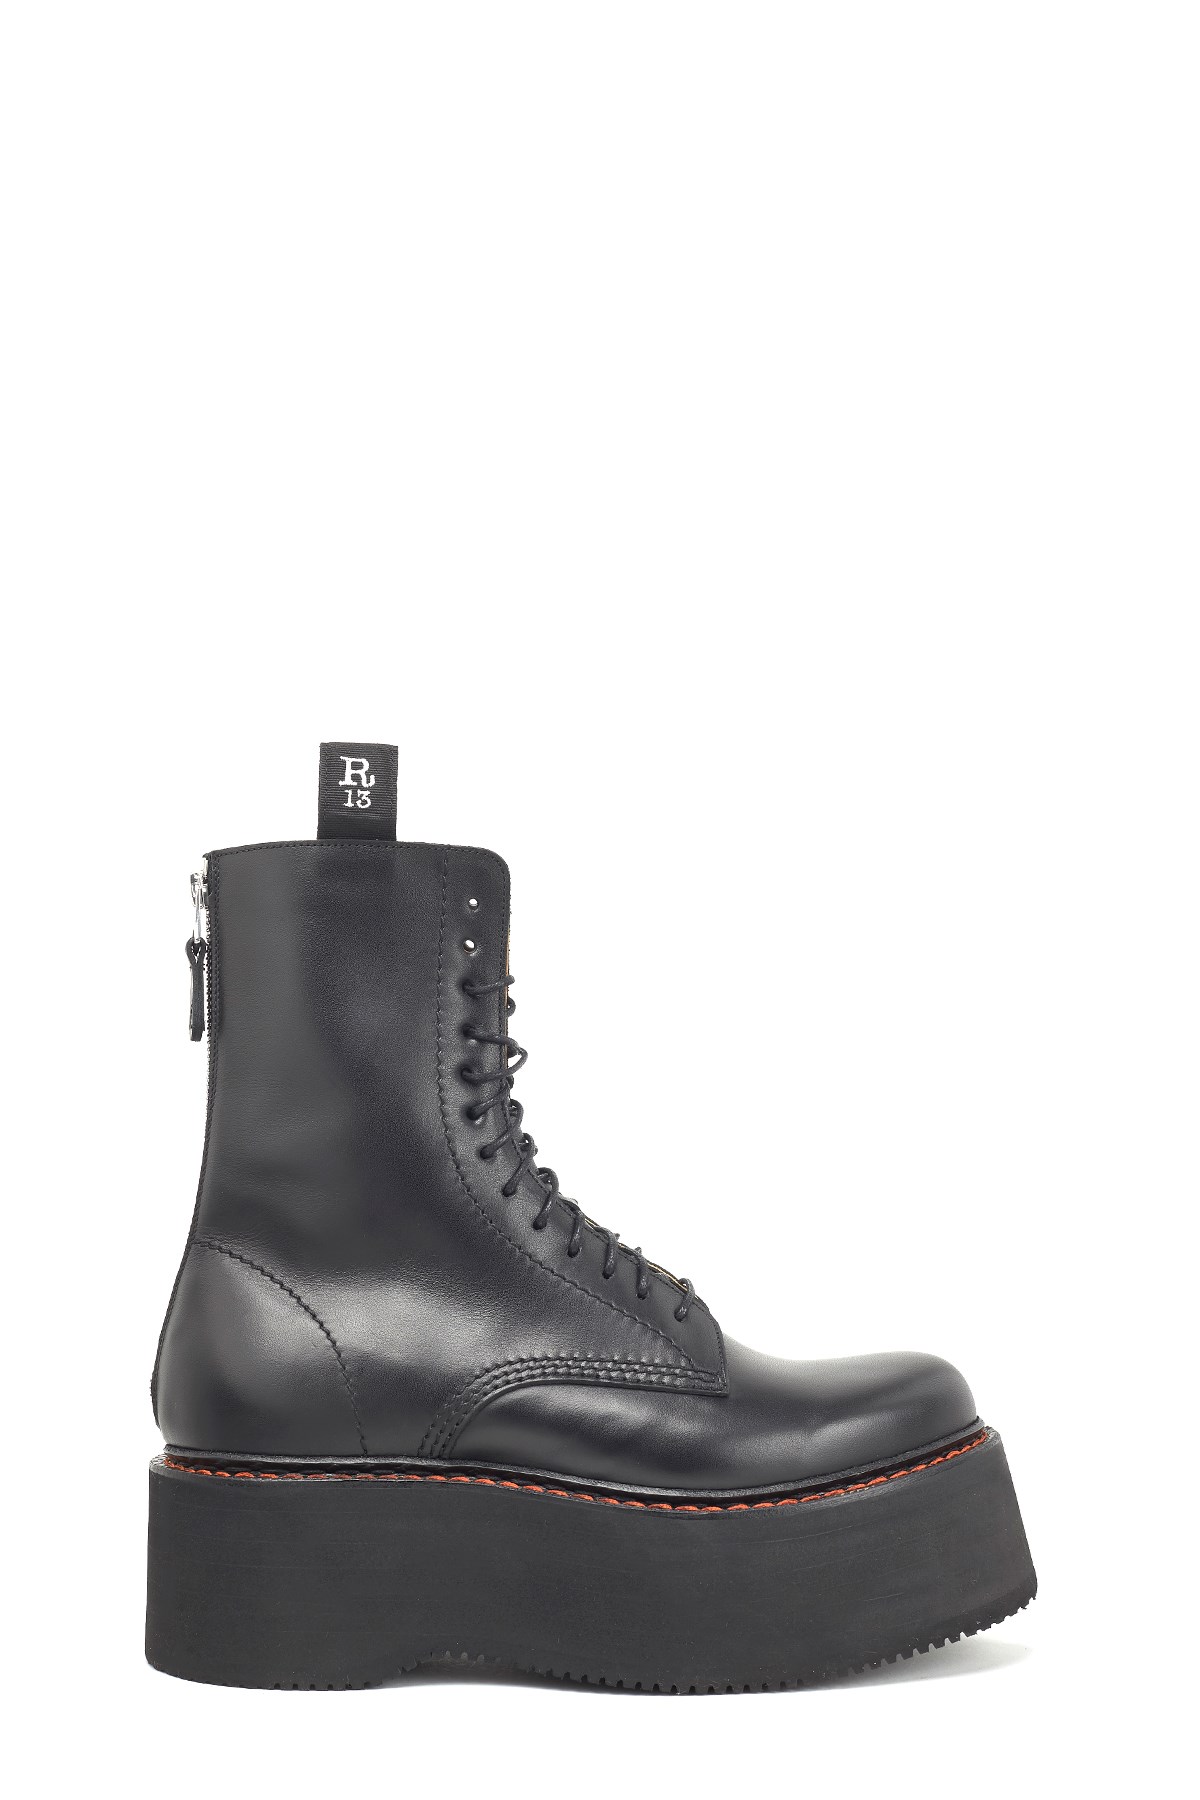 R13 'X Stack’ Combat Boots